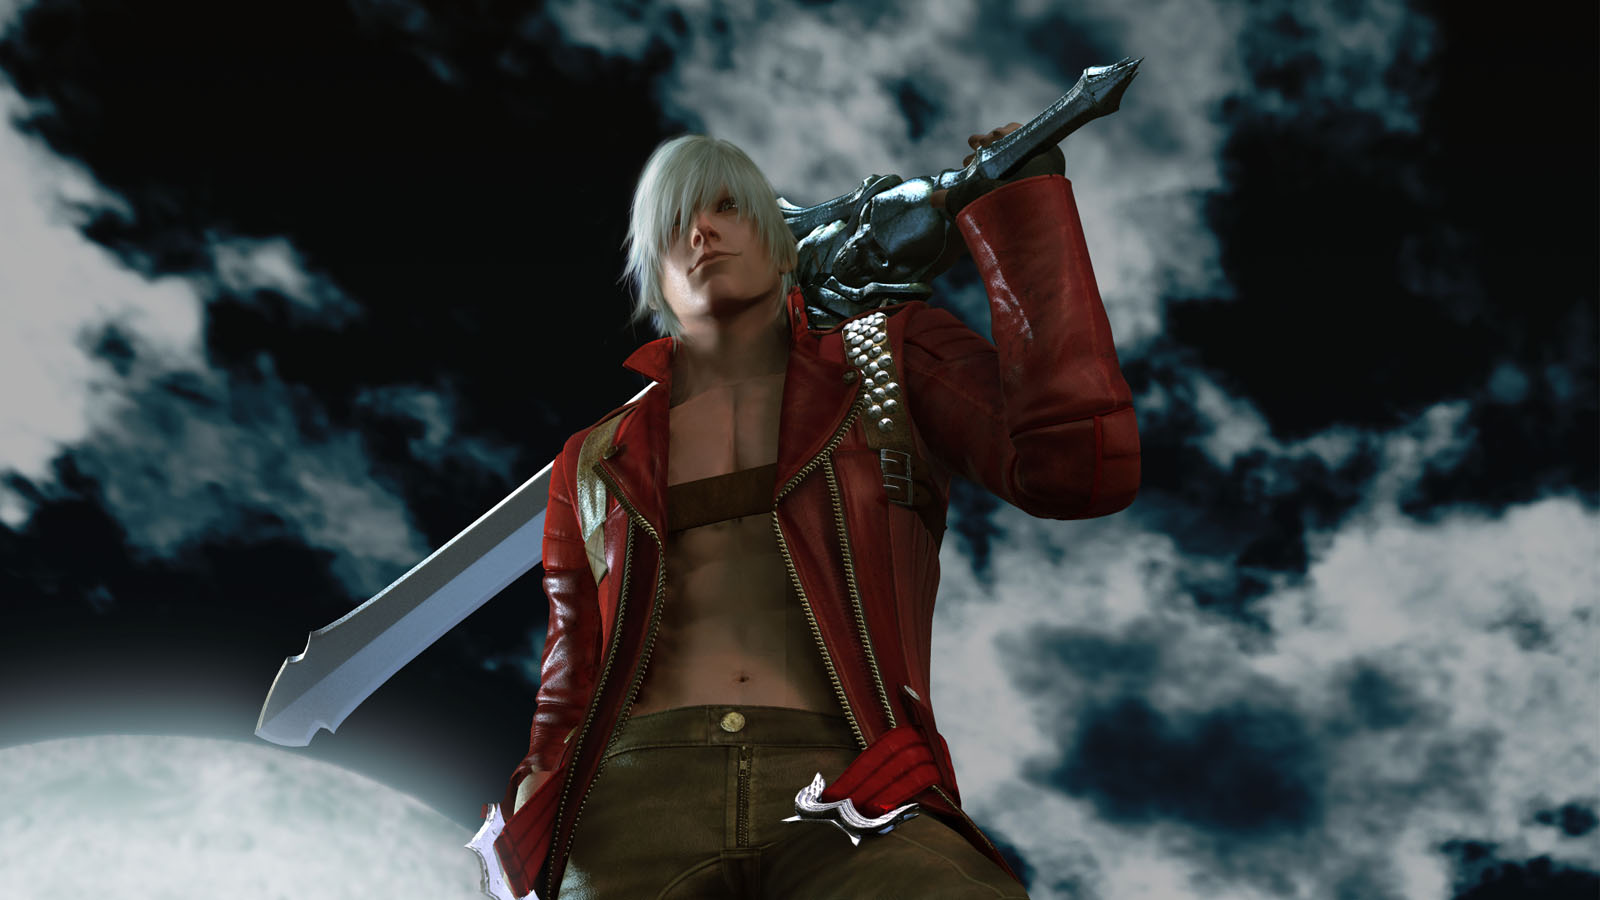 Devil May Cry 3 Special Edition for Switch adds 'Style Change